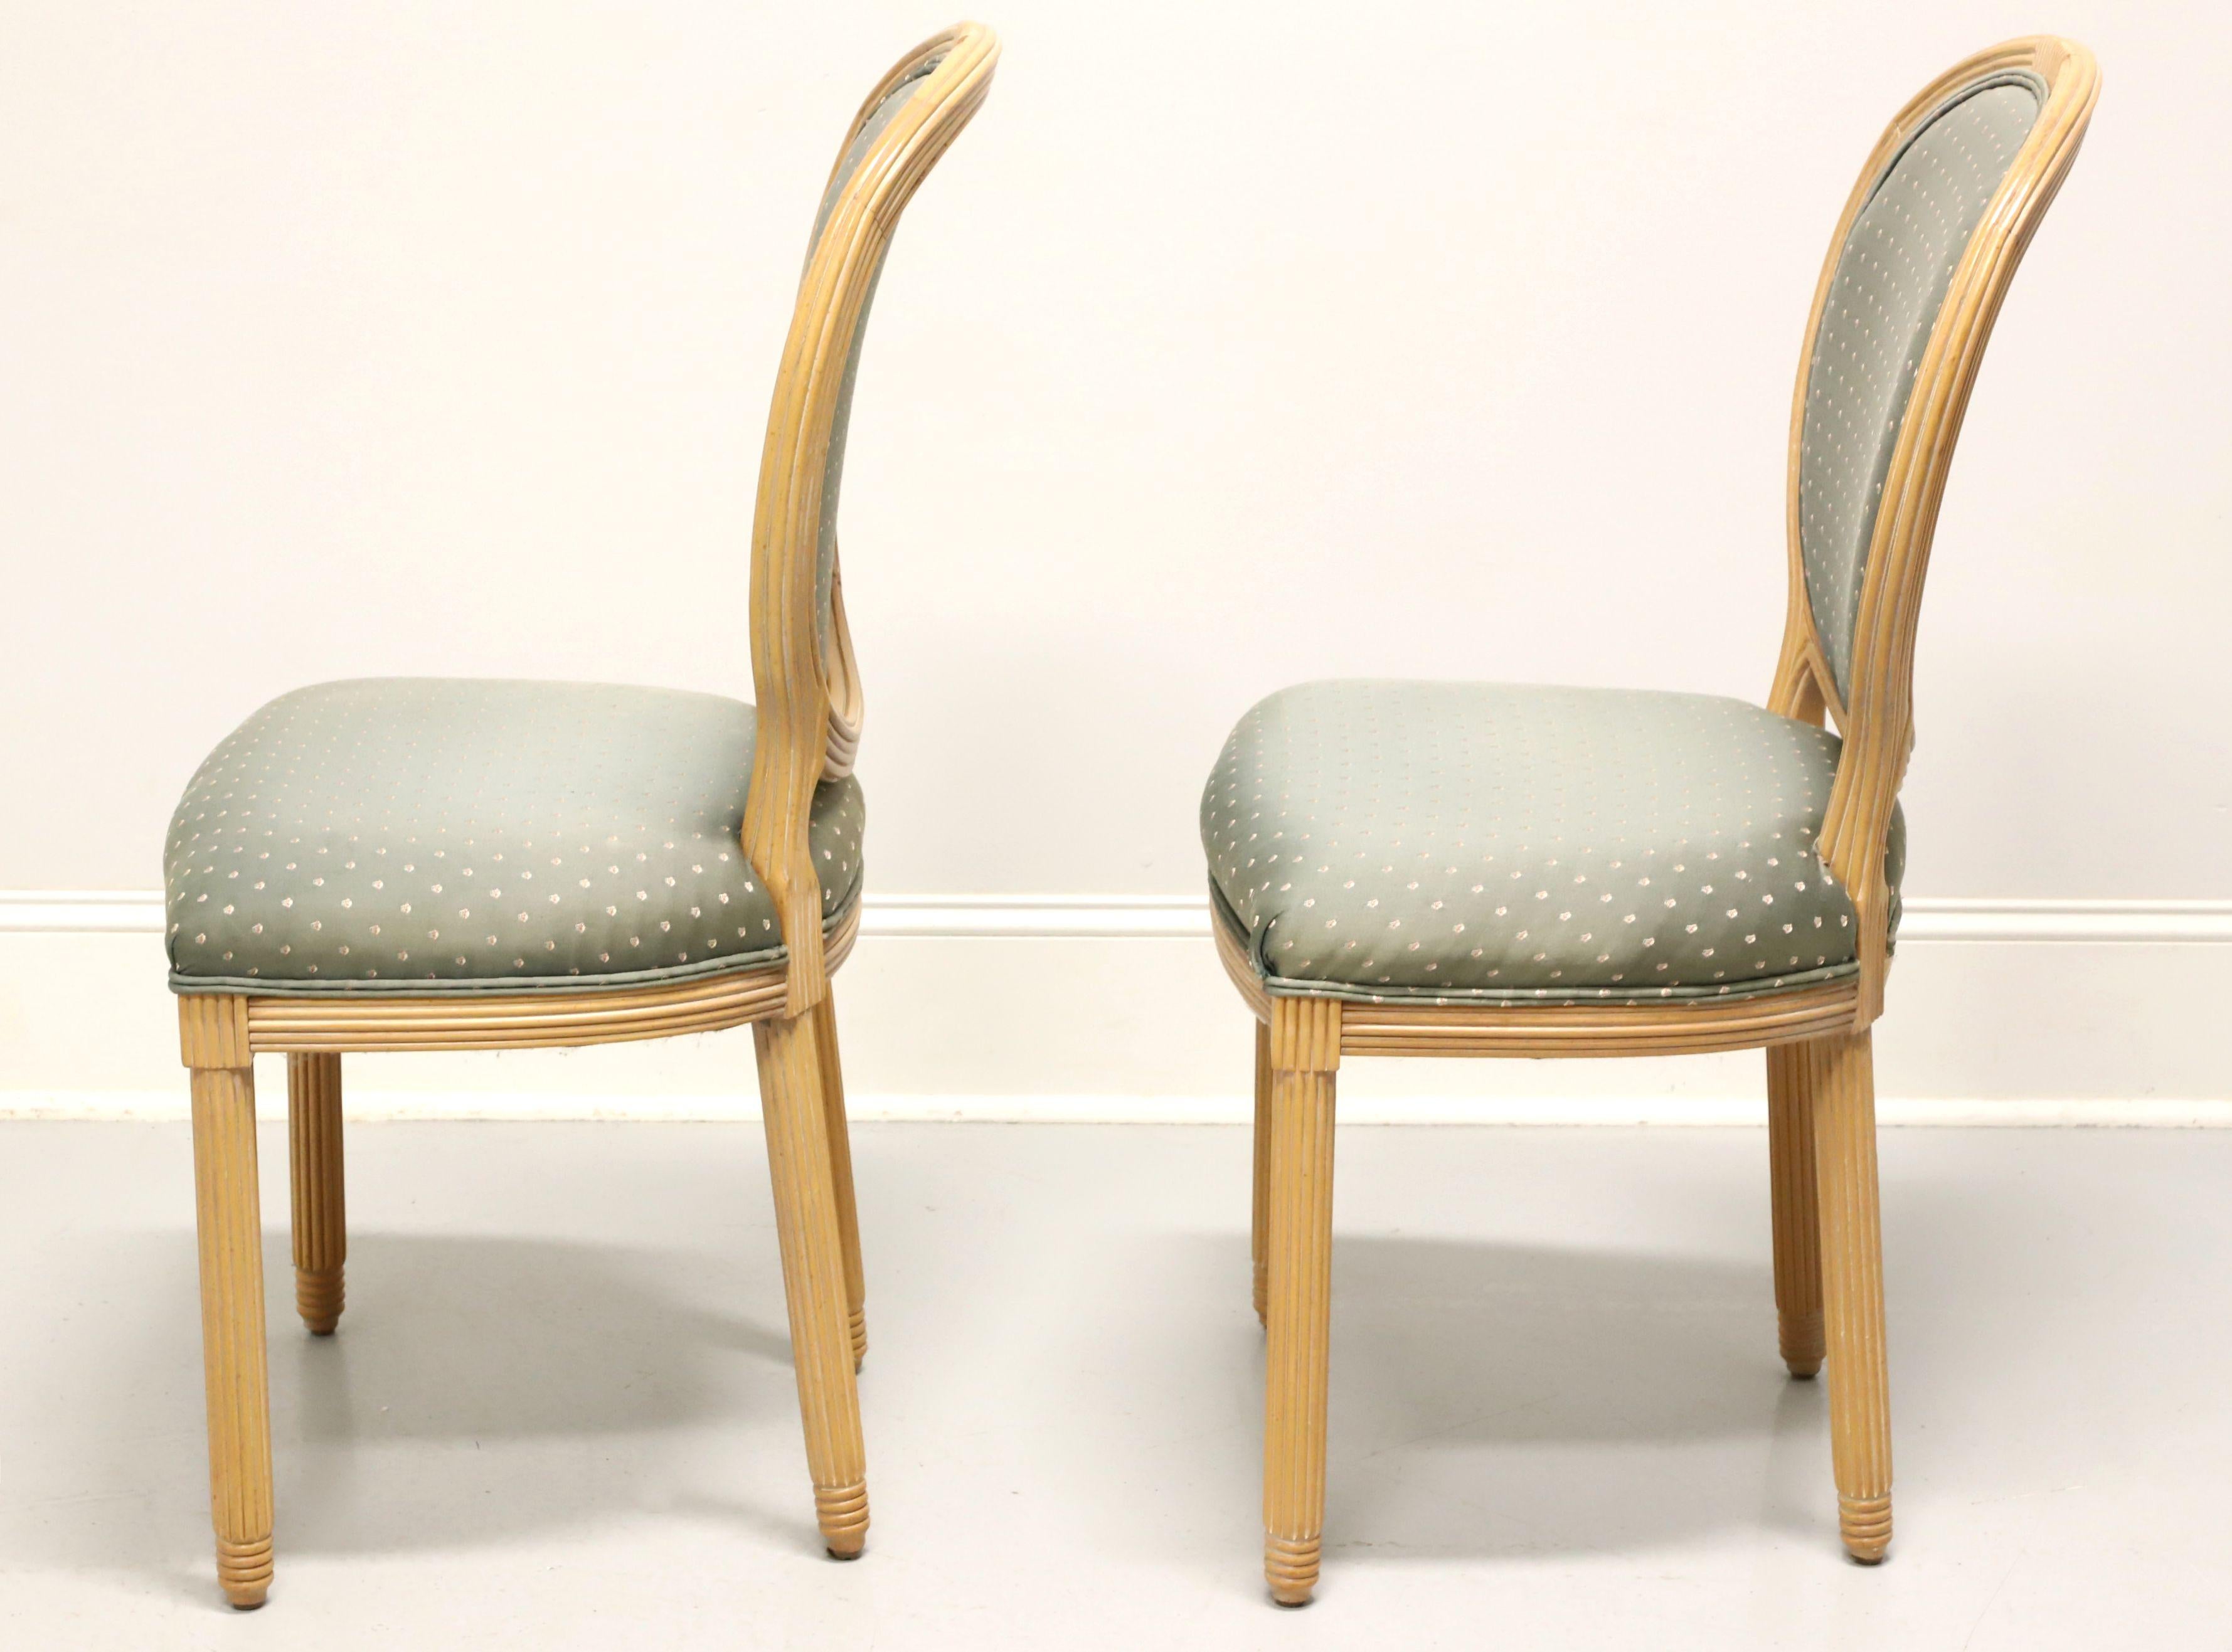 AMERICAN OF MARTINSVILLE French Provincial Louis XVI Dining Side Chairs - Pair A In Good Condition For Sale In Charlotte, NC